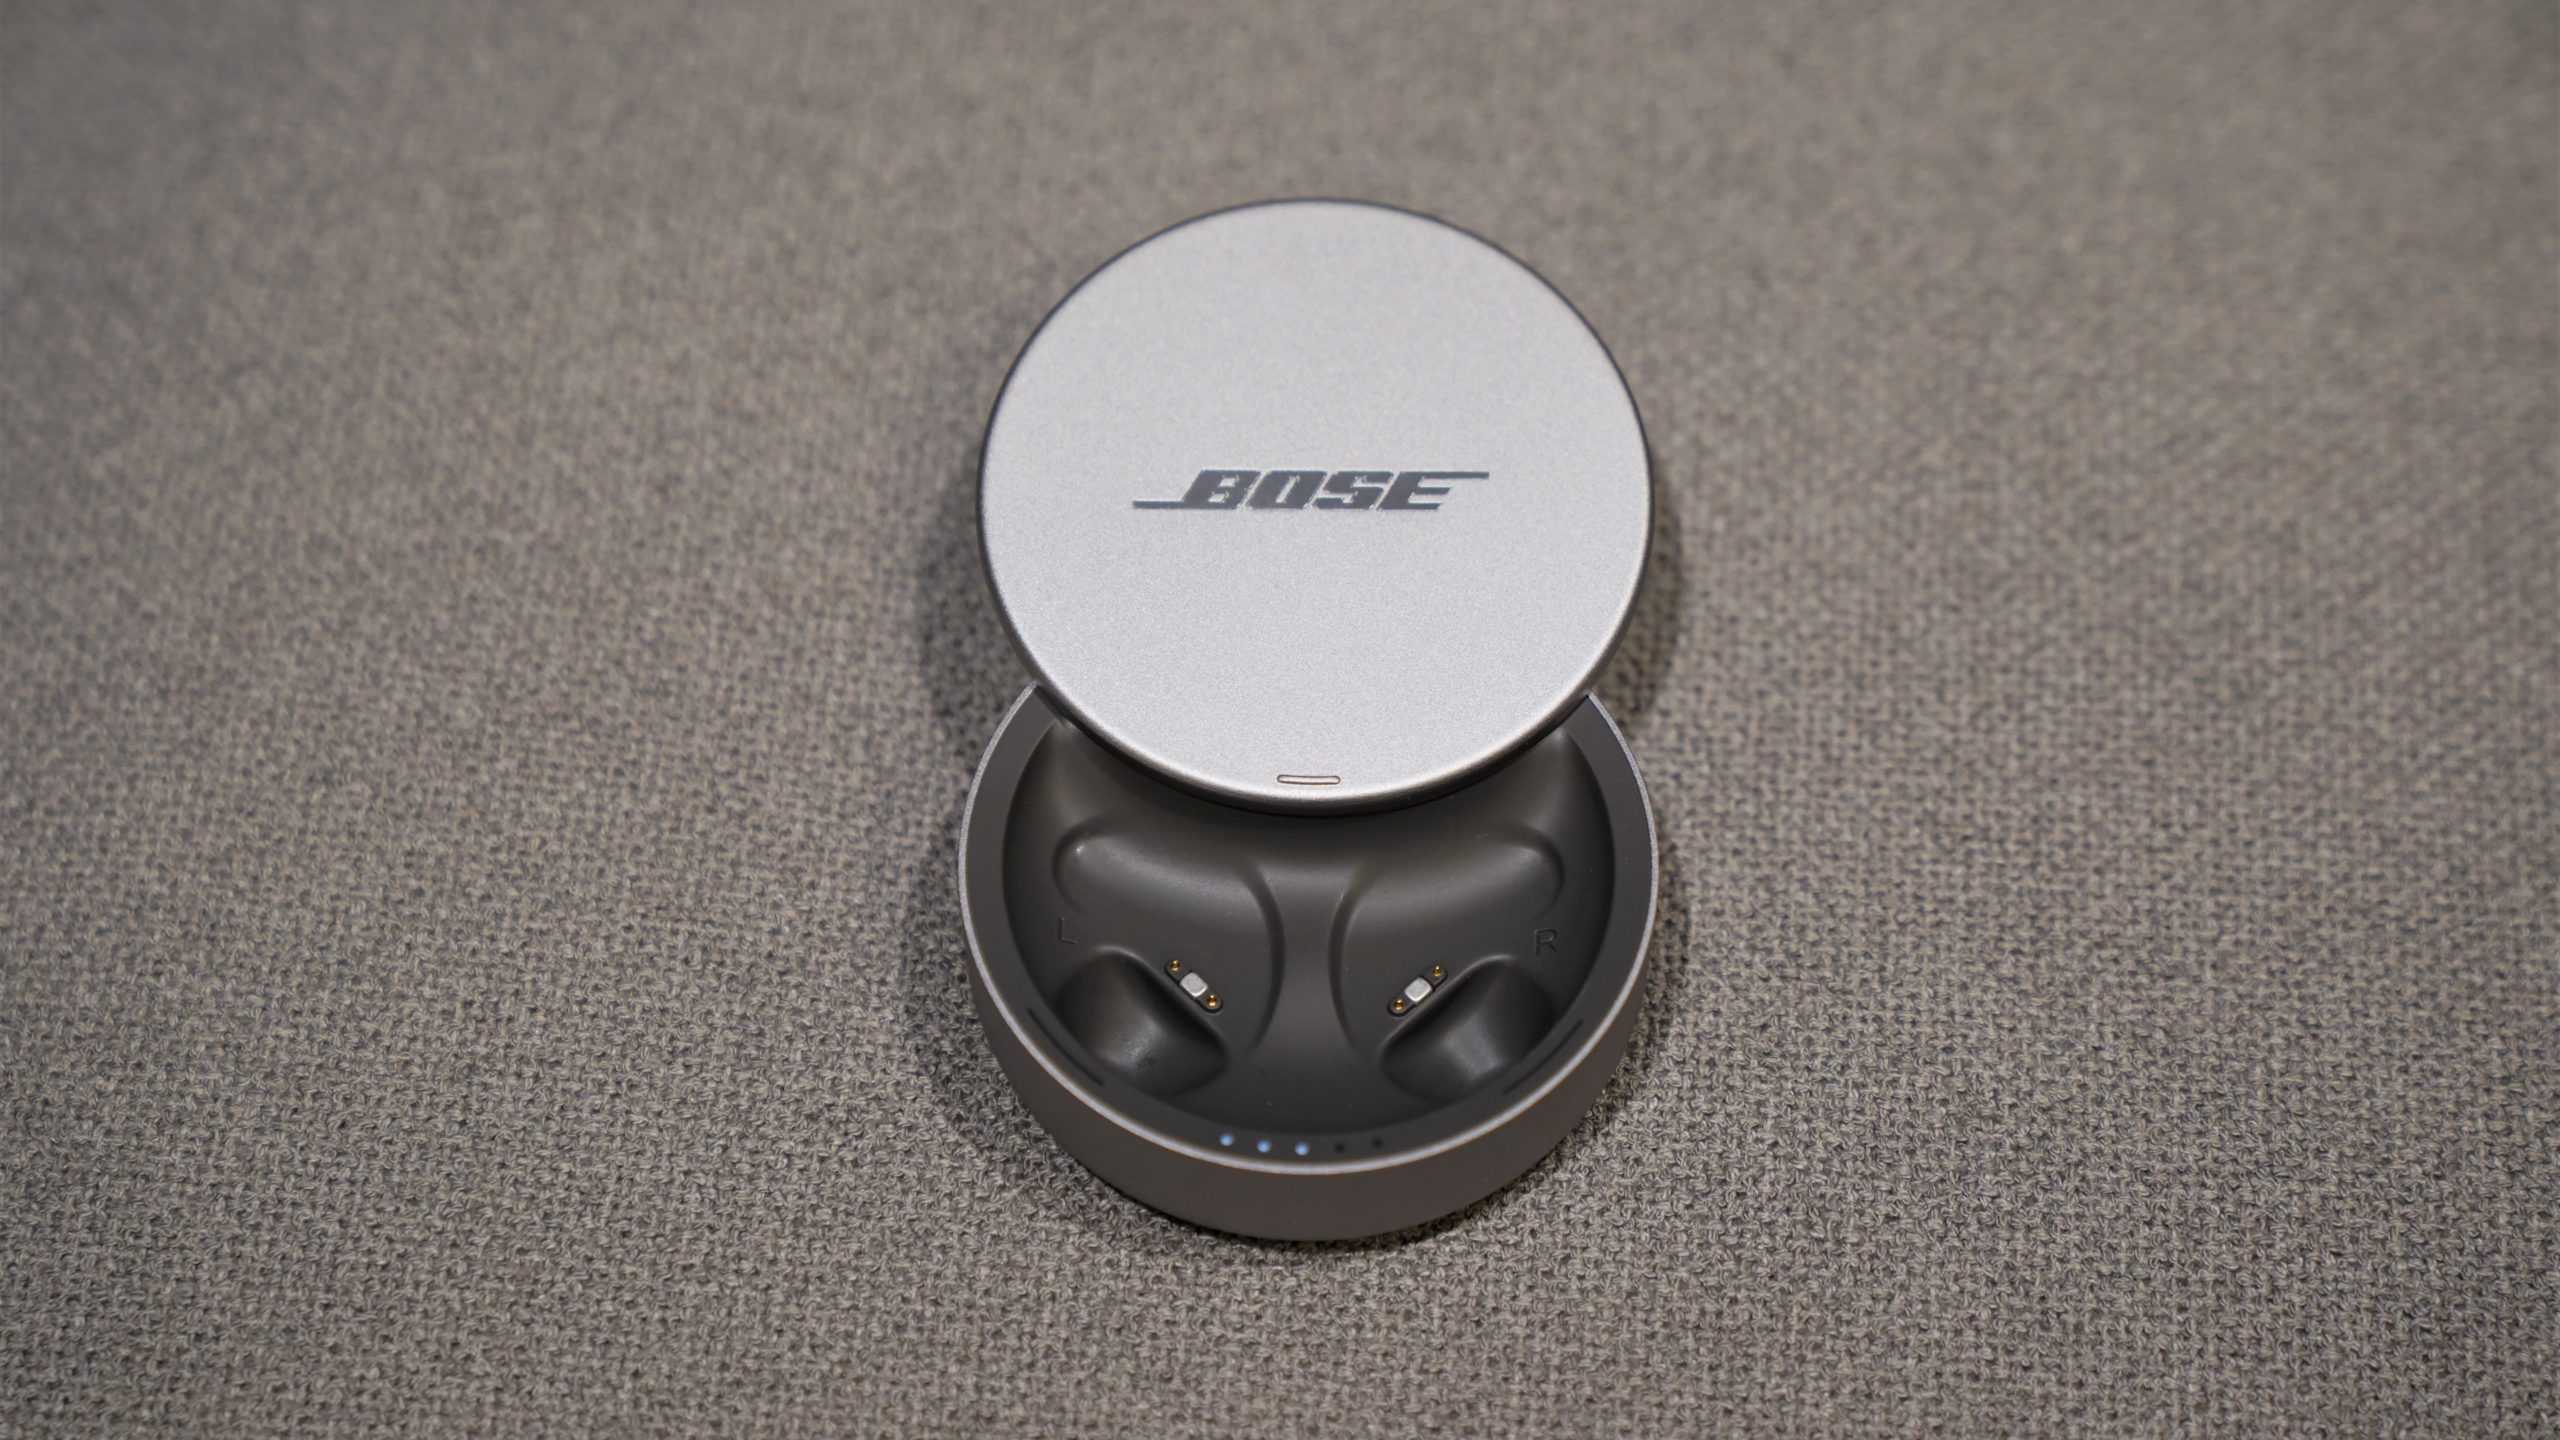 Bose Has A Pricey Winner With Its Sleep-Friendly Earbuds